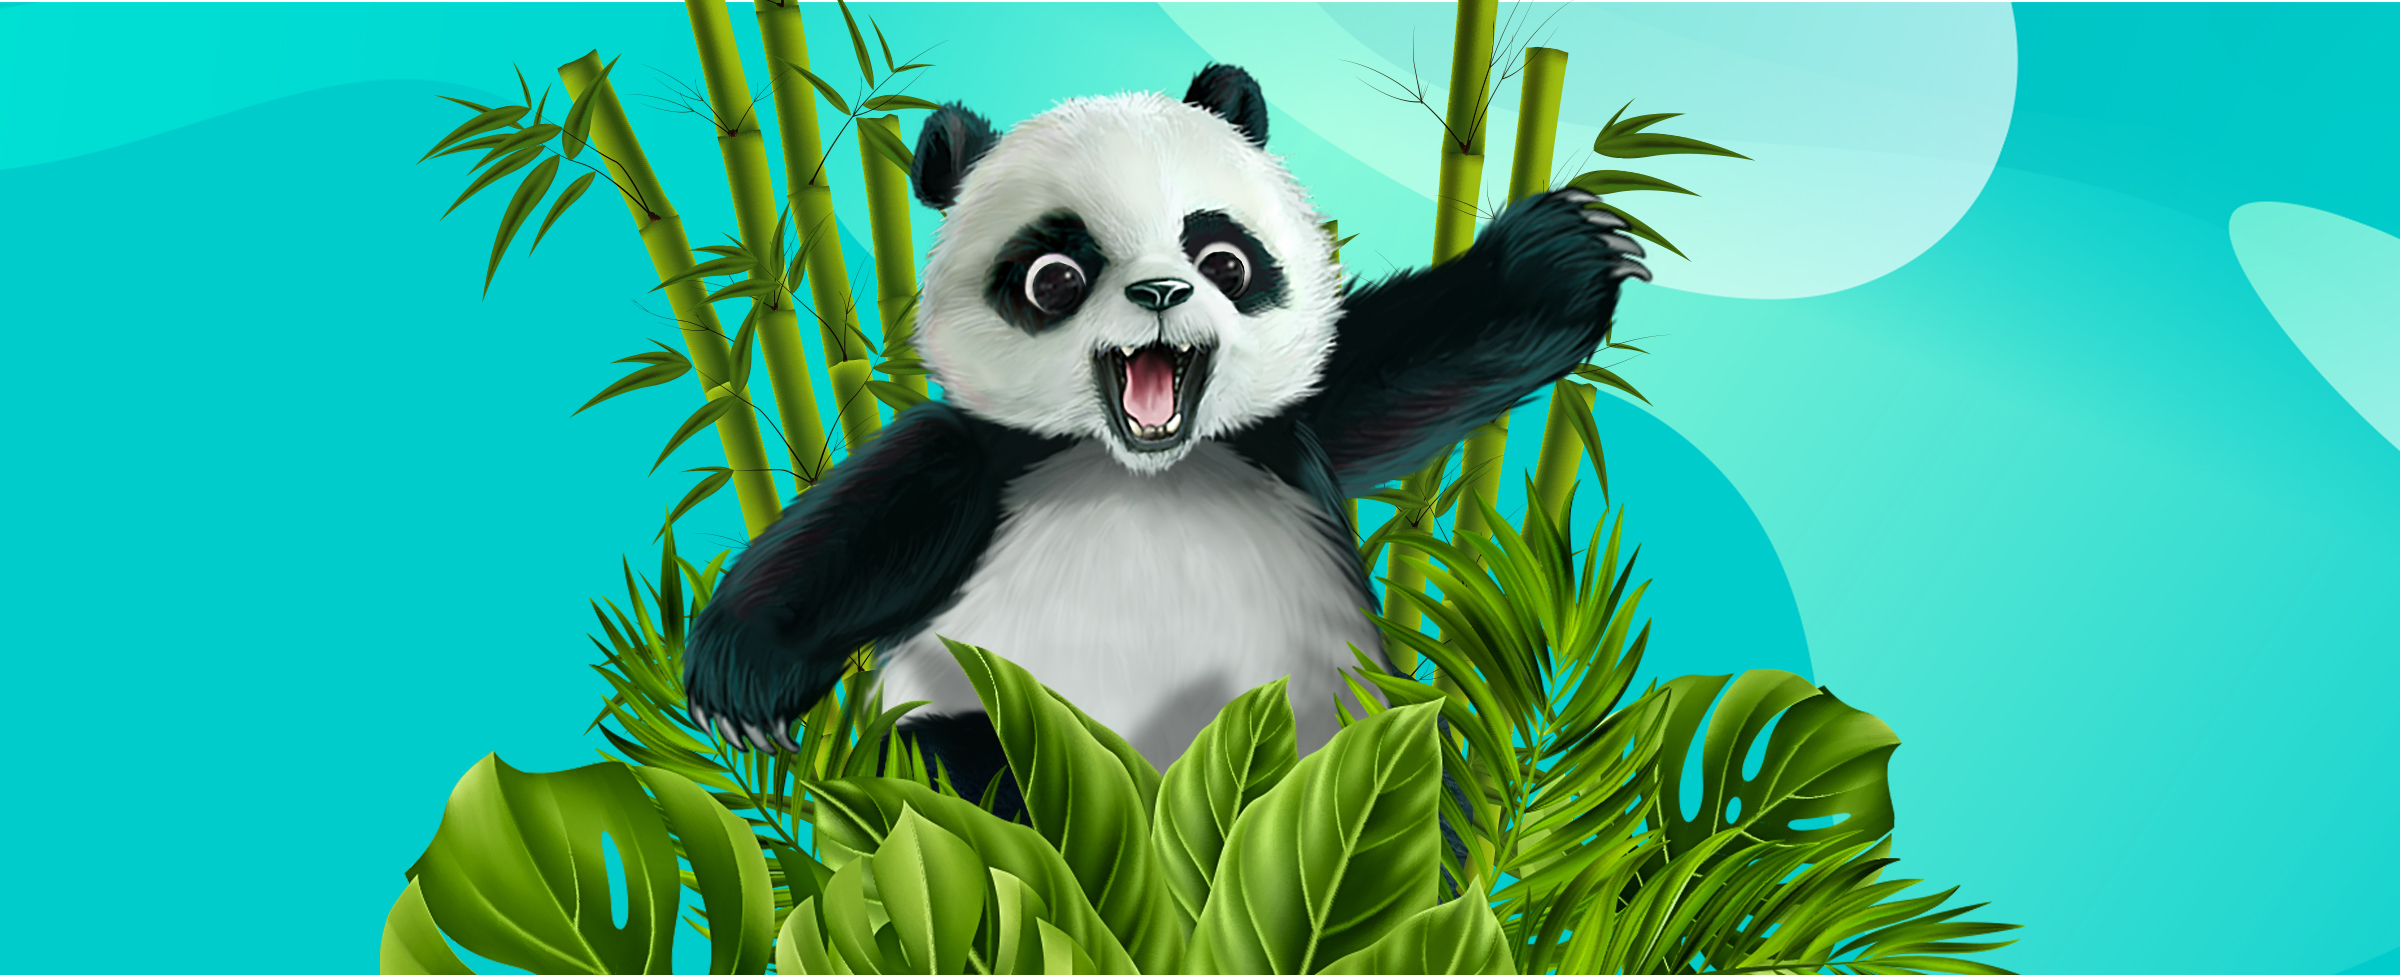 What’s everyone’s most adorable animal? What else but the panda! You’ll want to take this not-so-bashful furry friend home when you play Panda Pursuit.